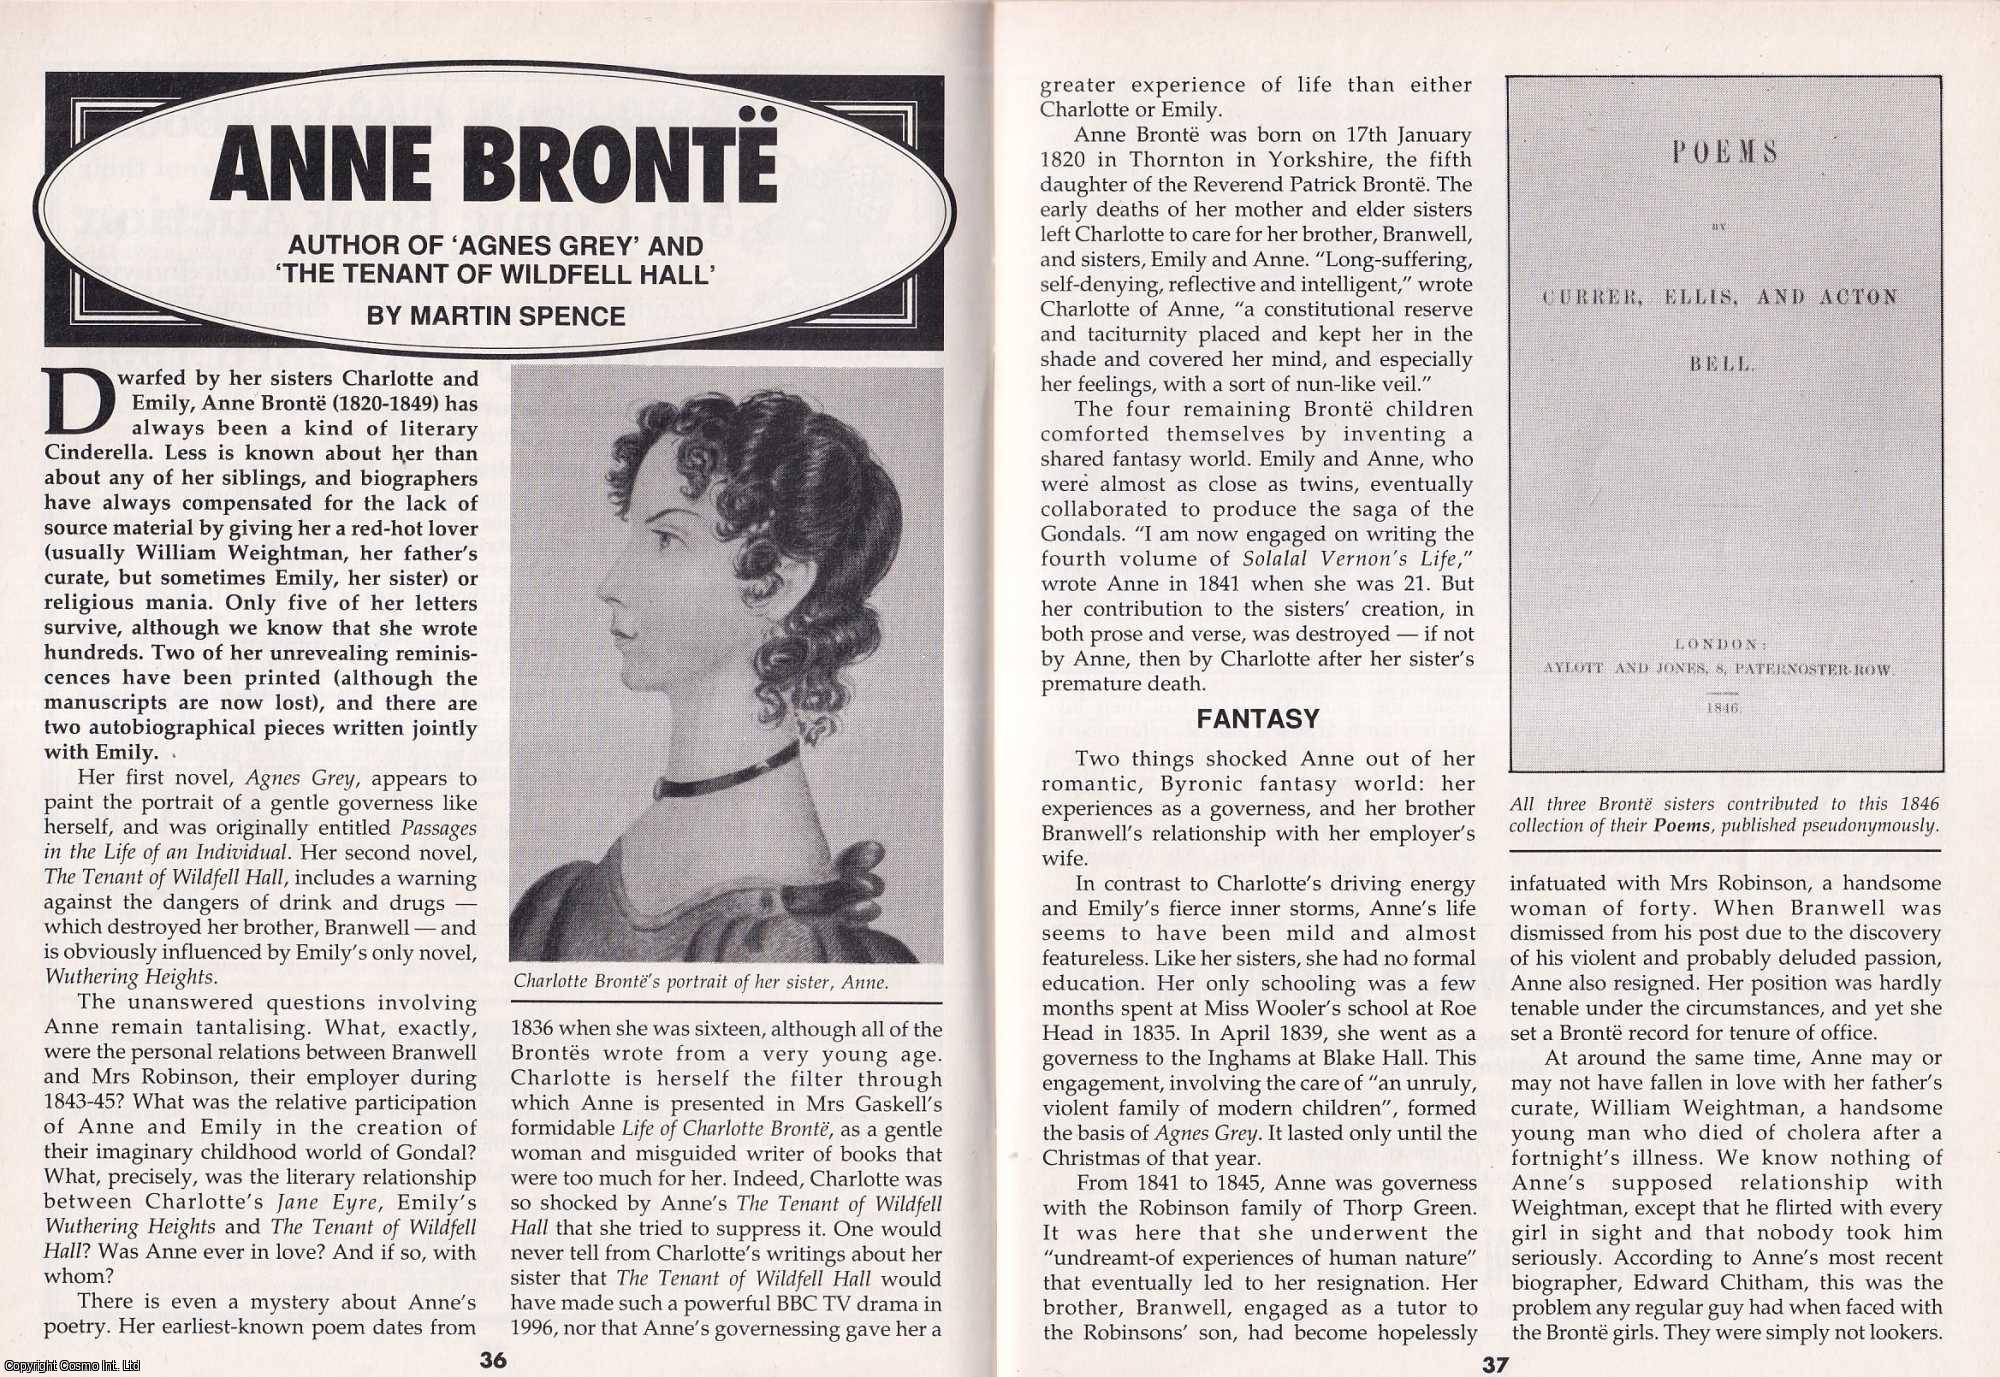 Martin Spence - Anne Bronte : Author of Agnes Grey & The Tenant of Wildfell Hall. This is an original article separated from an issue of The Book & Magazine Collector publication.